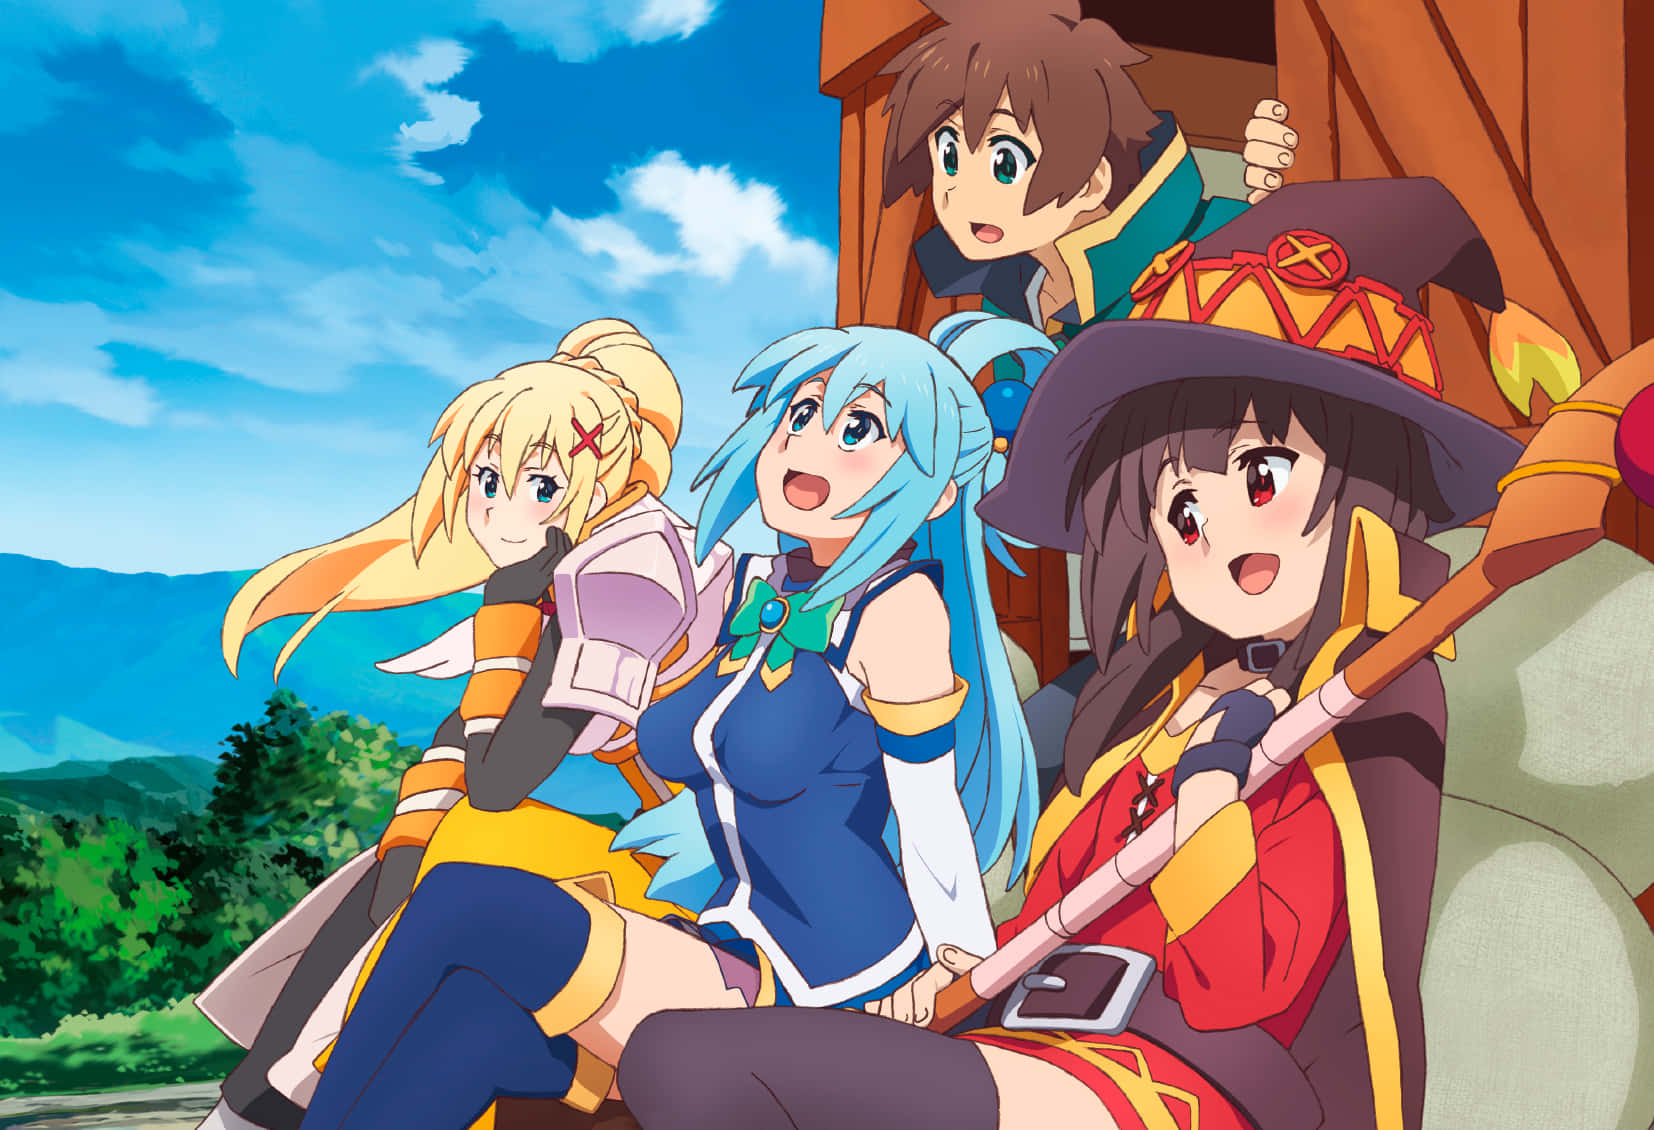 A Group Of Anime Characters Sitting On A Wooden Bench